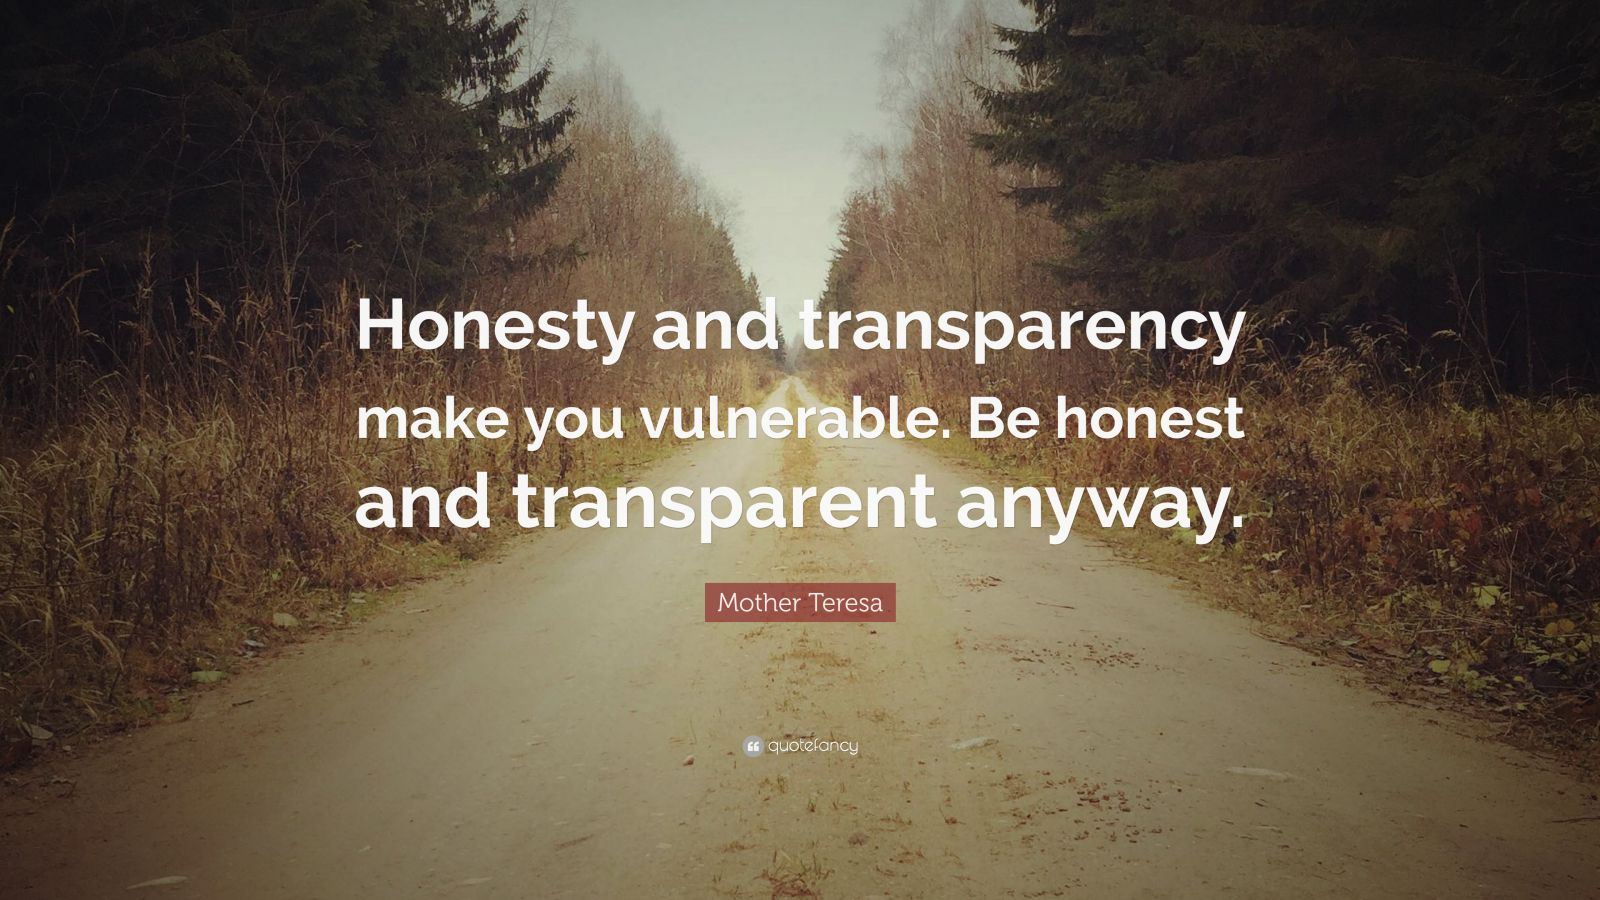 Mother Teresa Quote: “Honesty and transparency make you vulnerable. Be